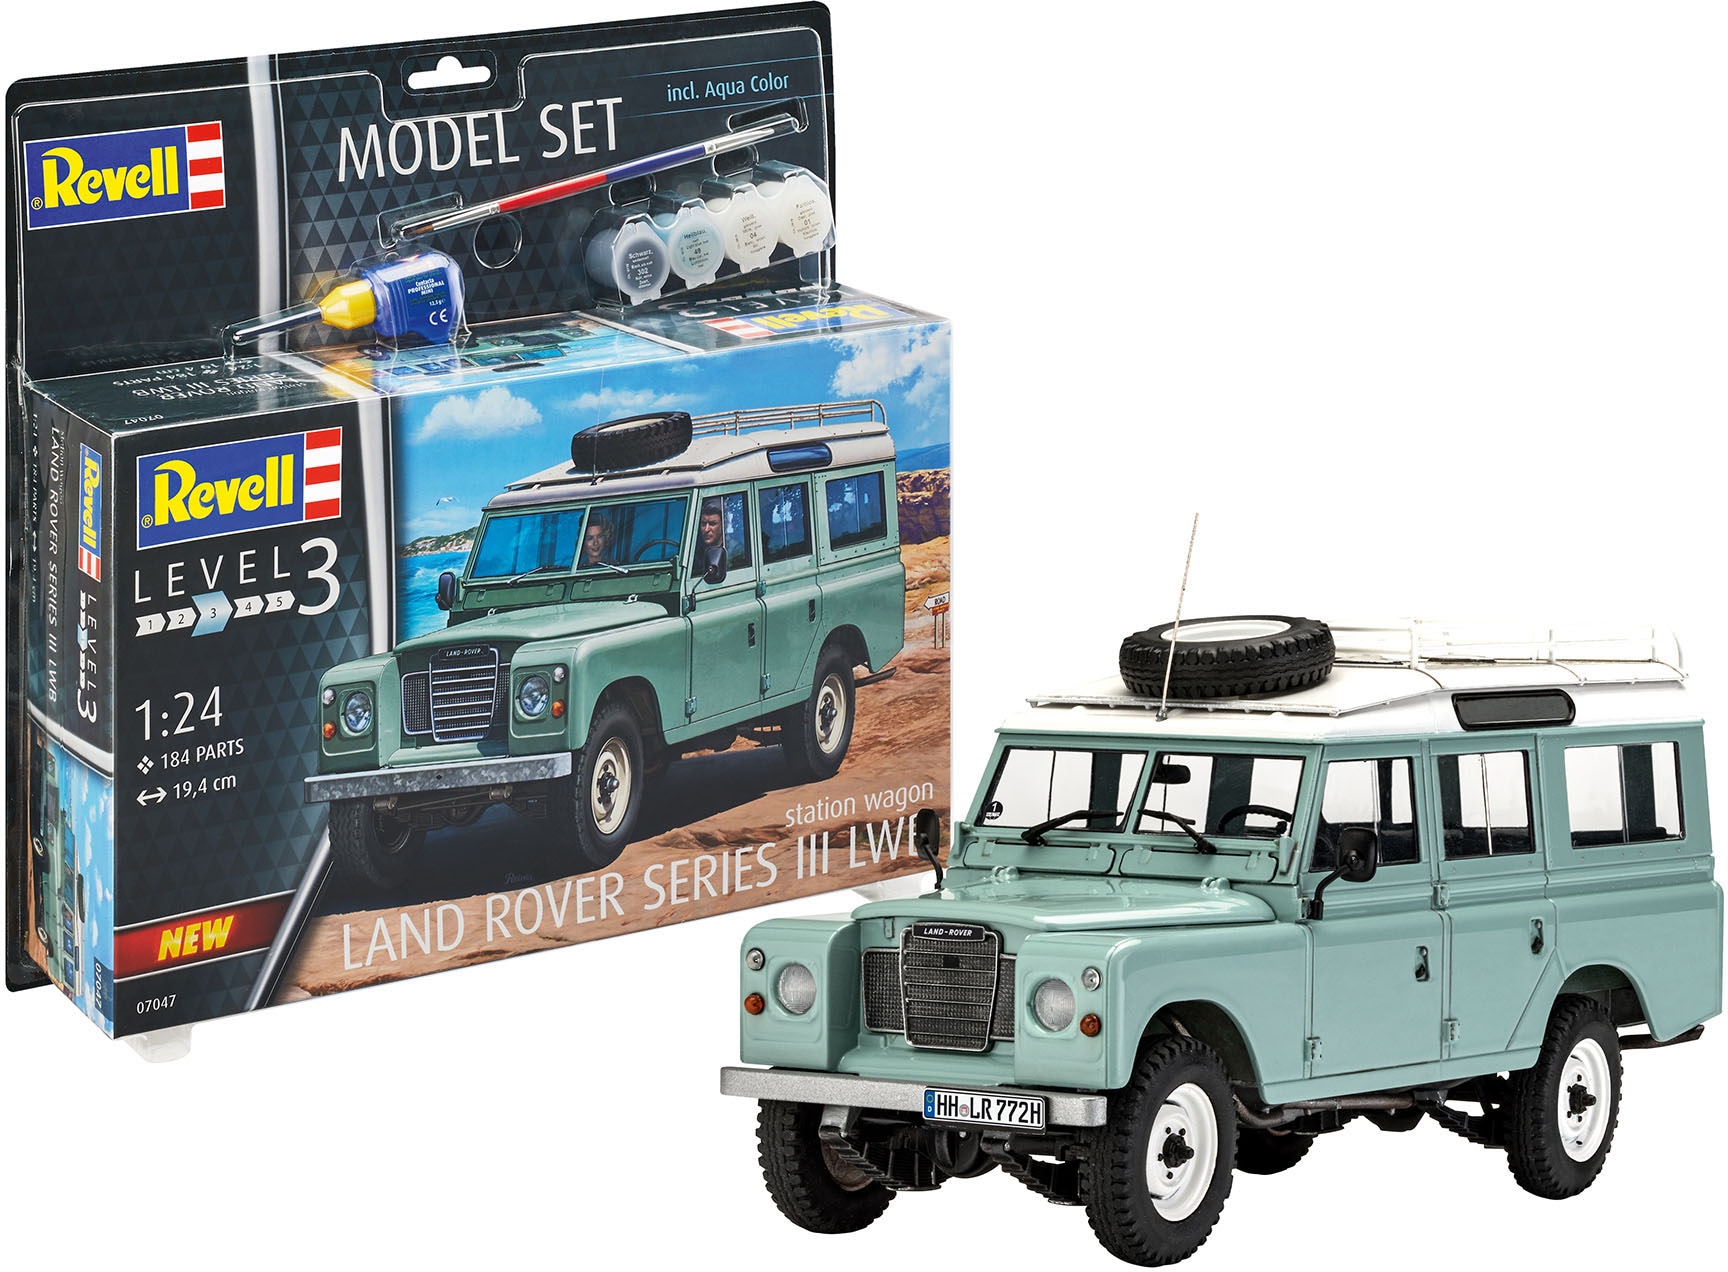 Modellbausatz »Land Rover Series III«, 1:24, Made in Europe